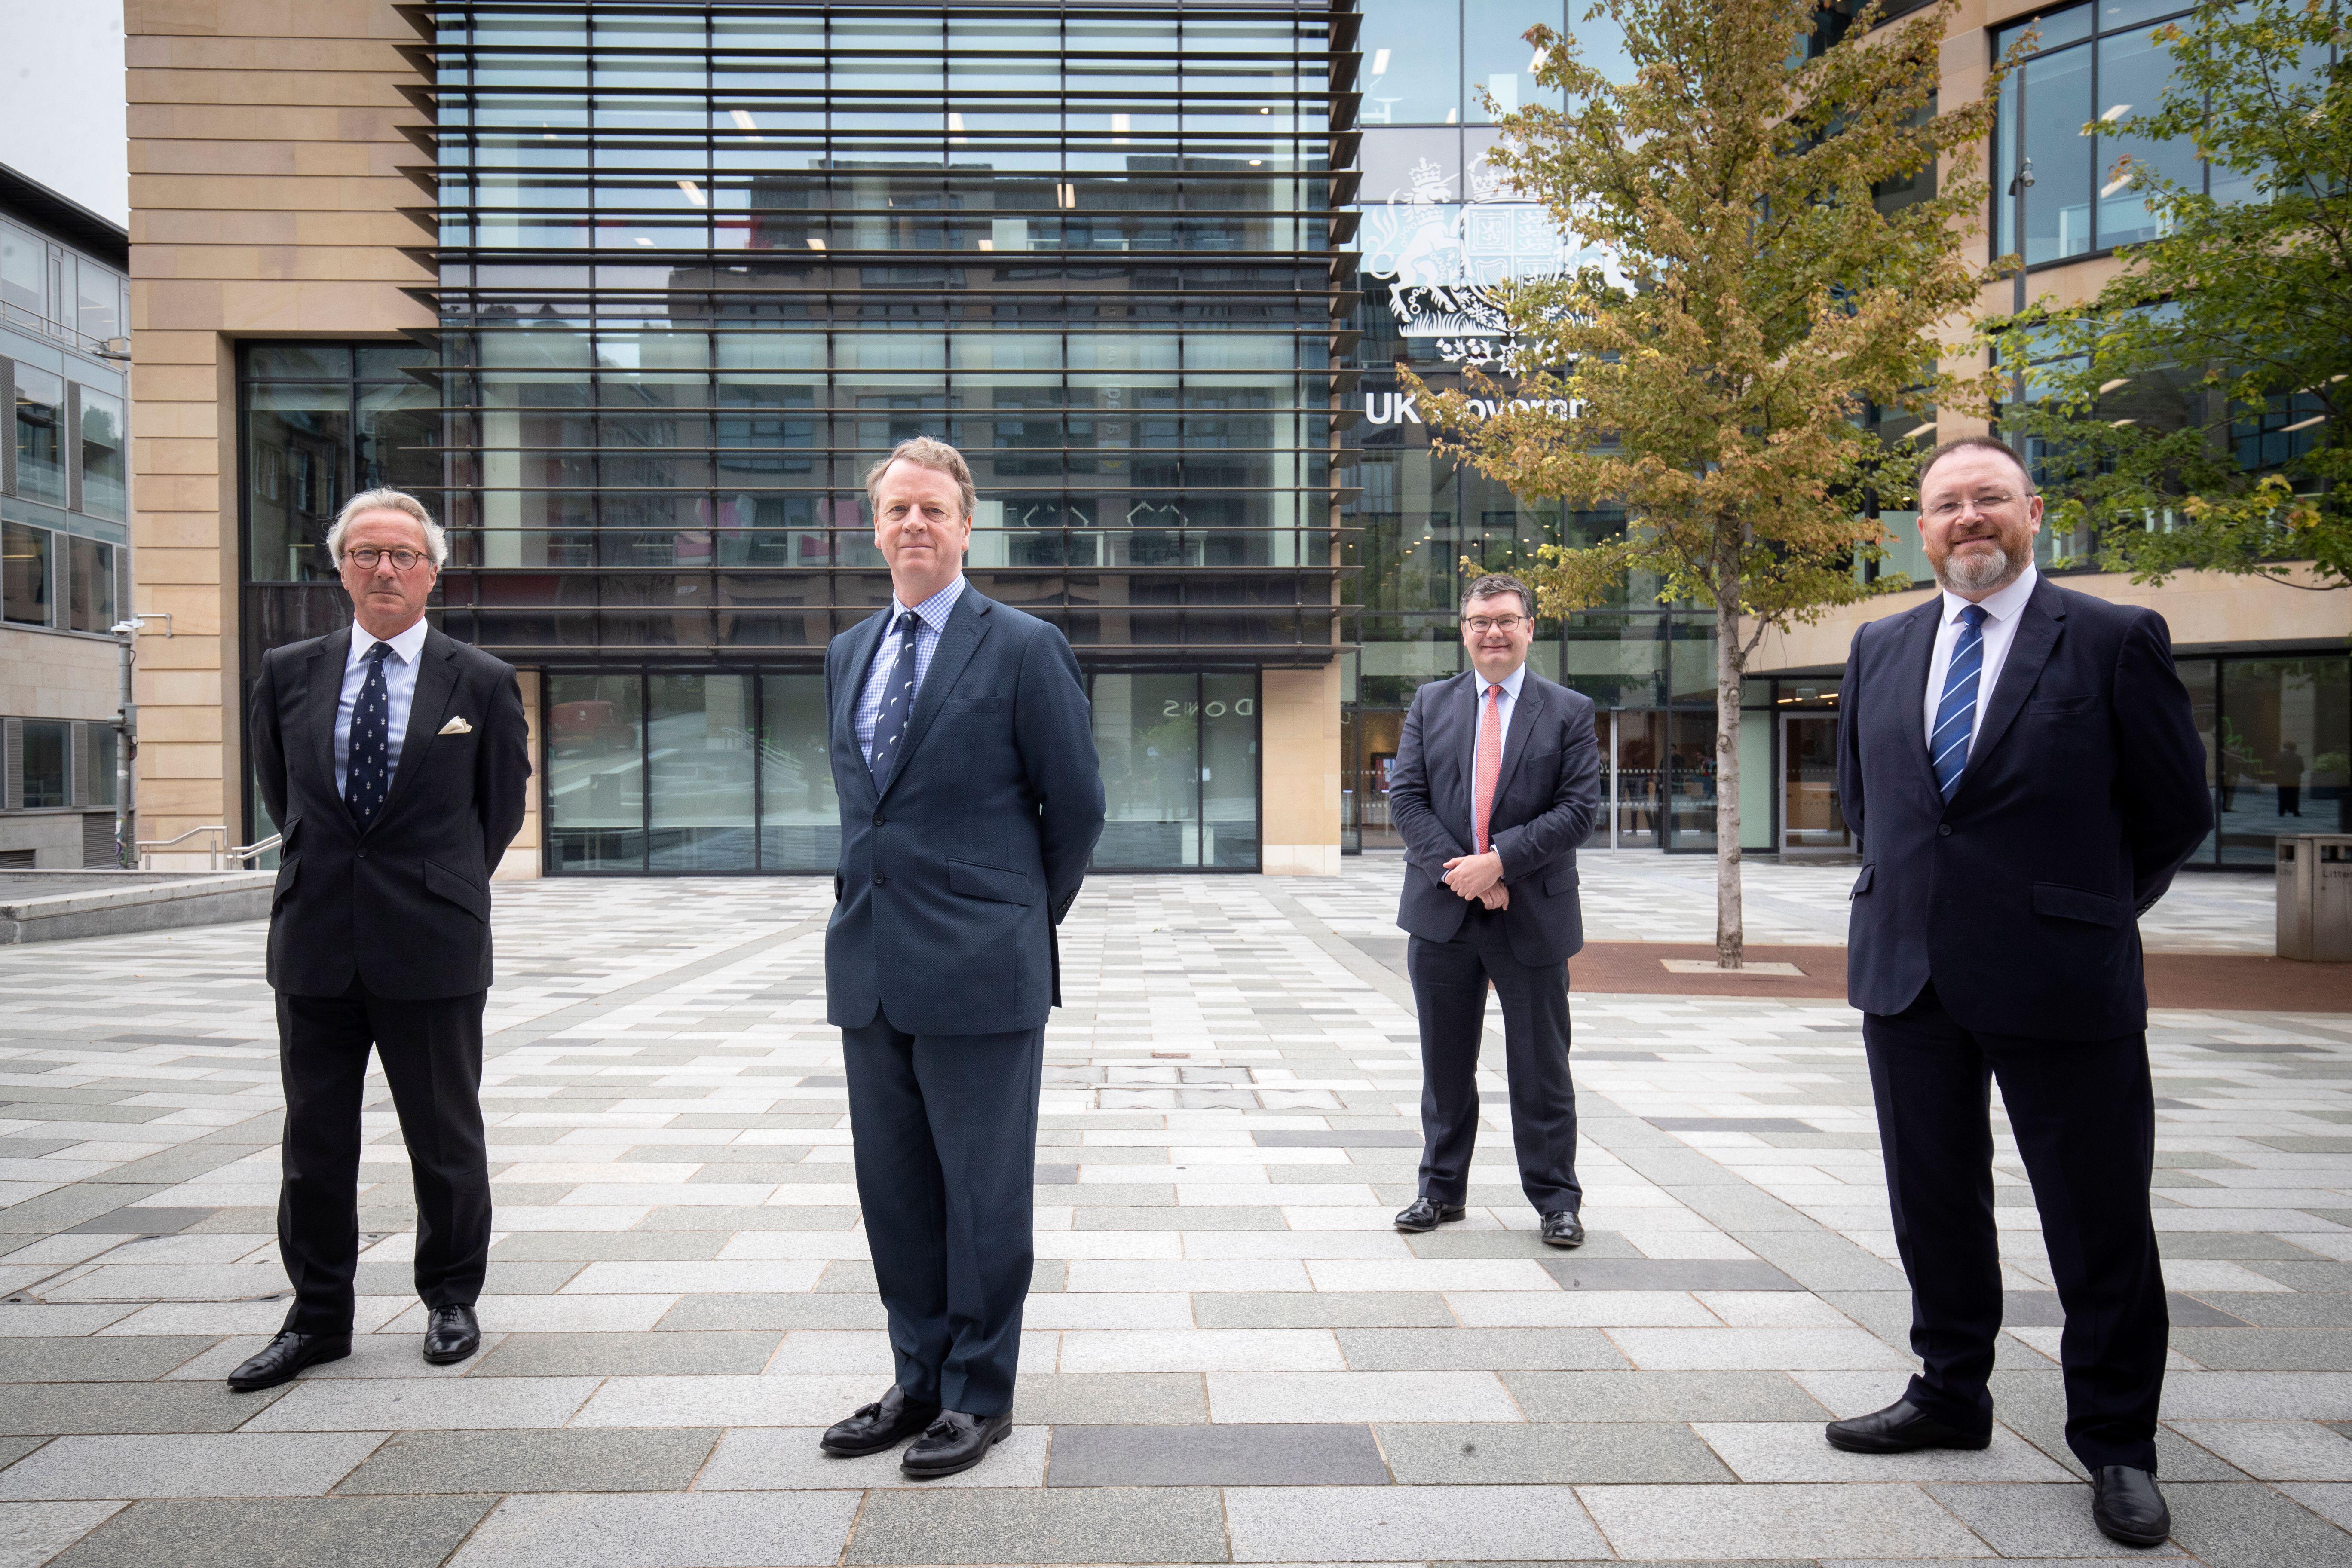 Iain Stewart (second from right) at the Scotland Office premises in Edinburgh